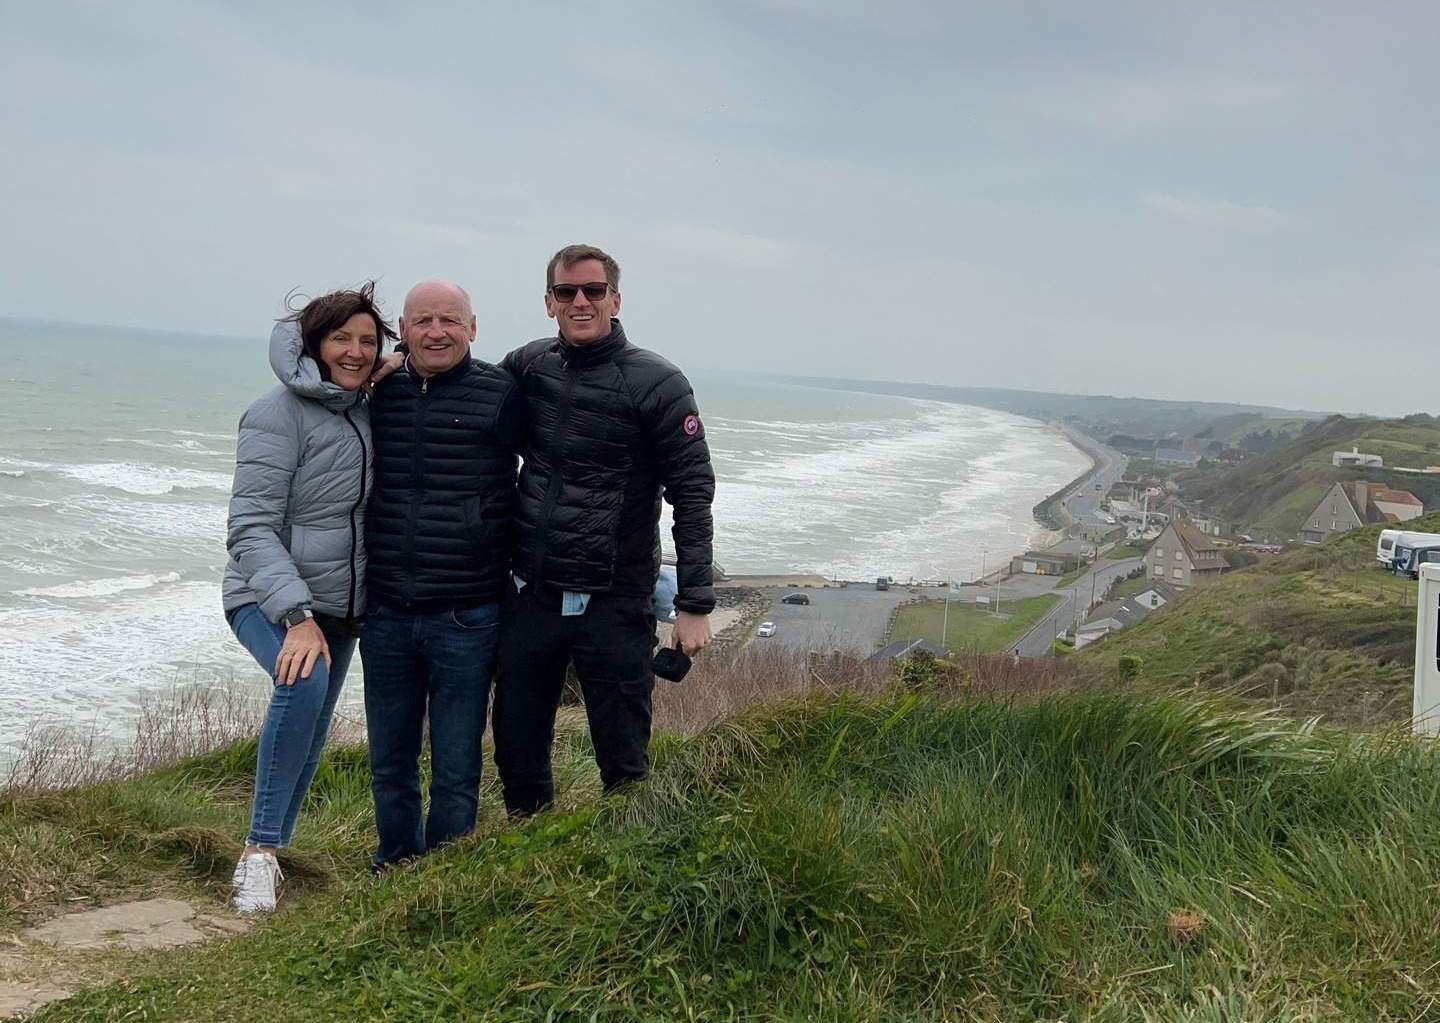 David Simpson and mom and dad in Omaha beach in Normandy, France. Is there any such thing as a good beach in Normandy?